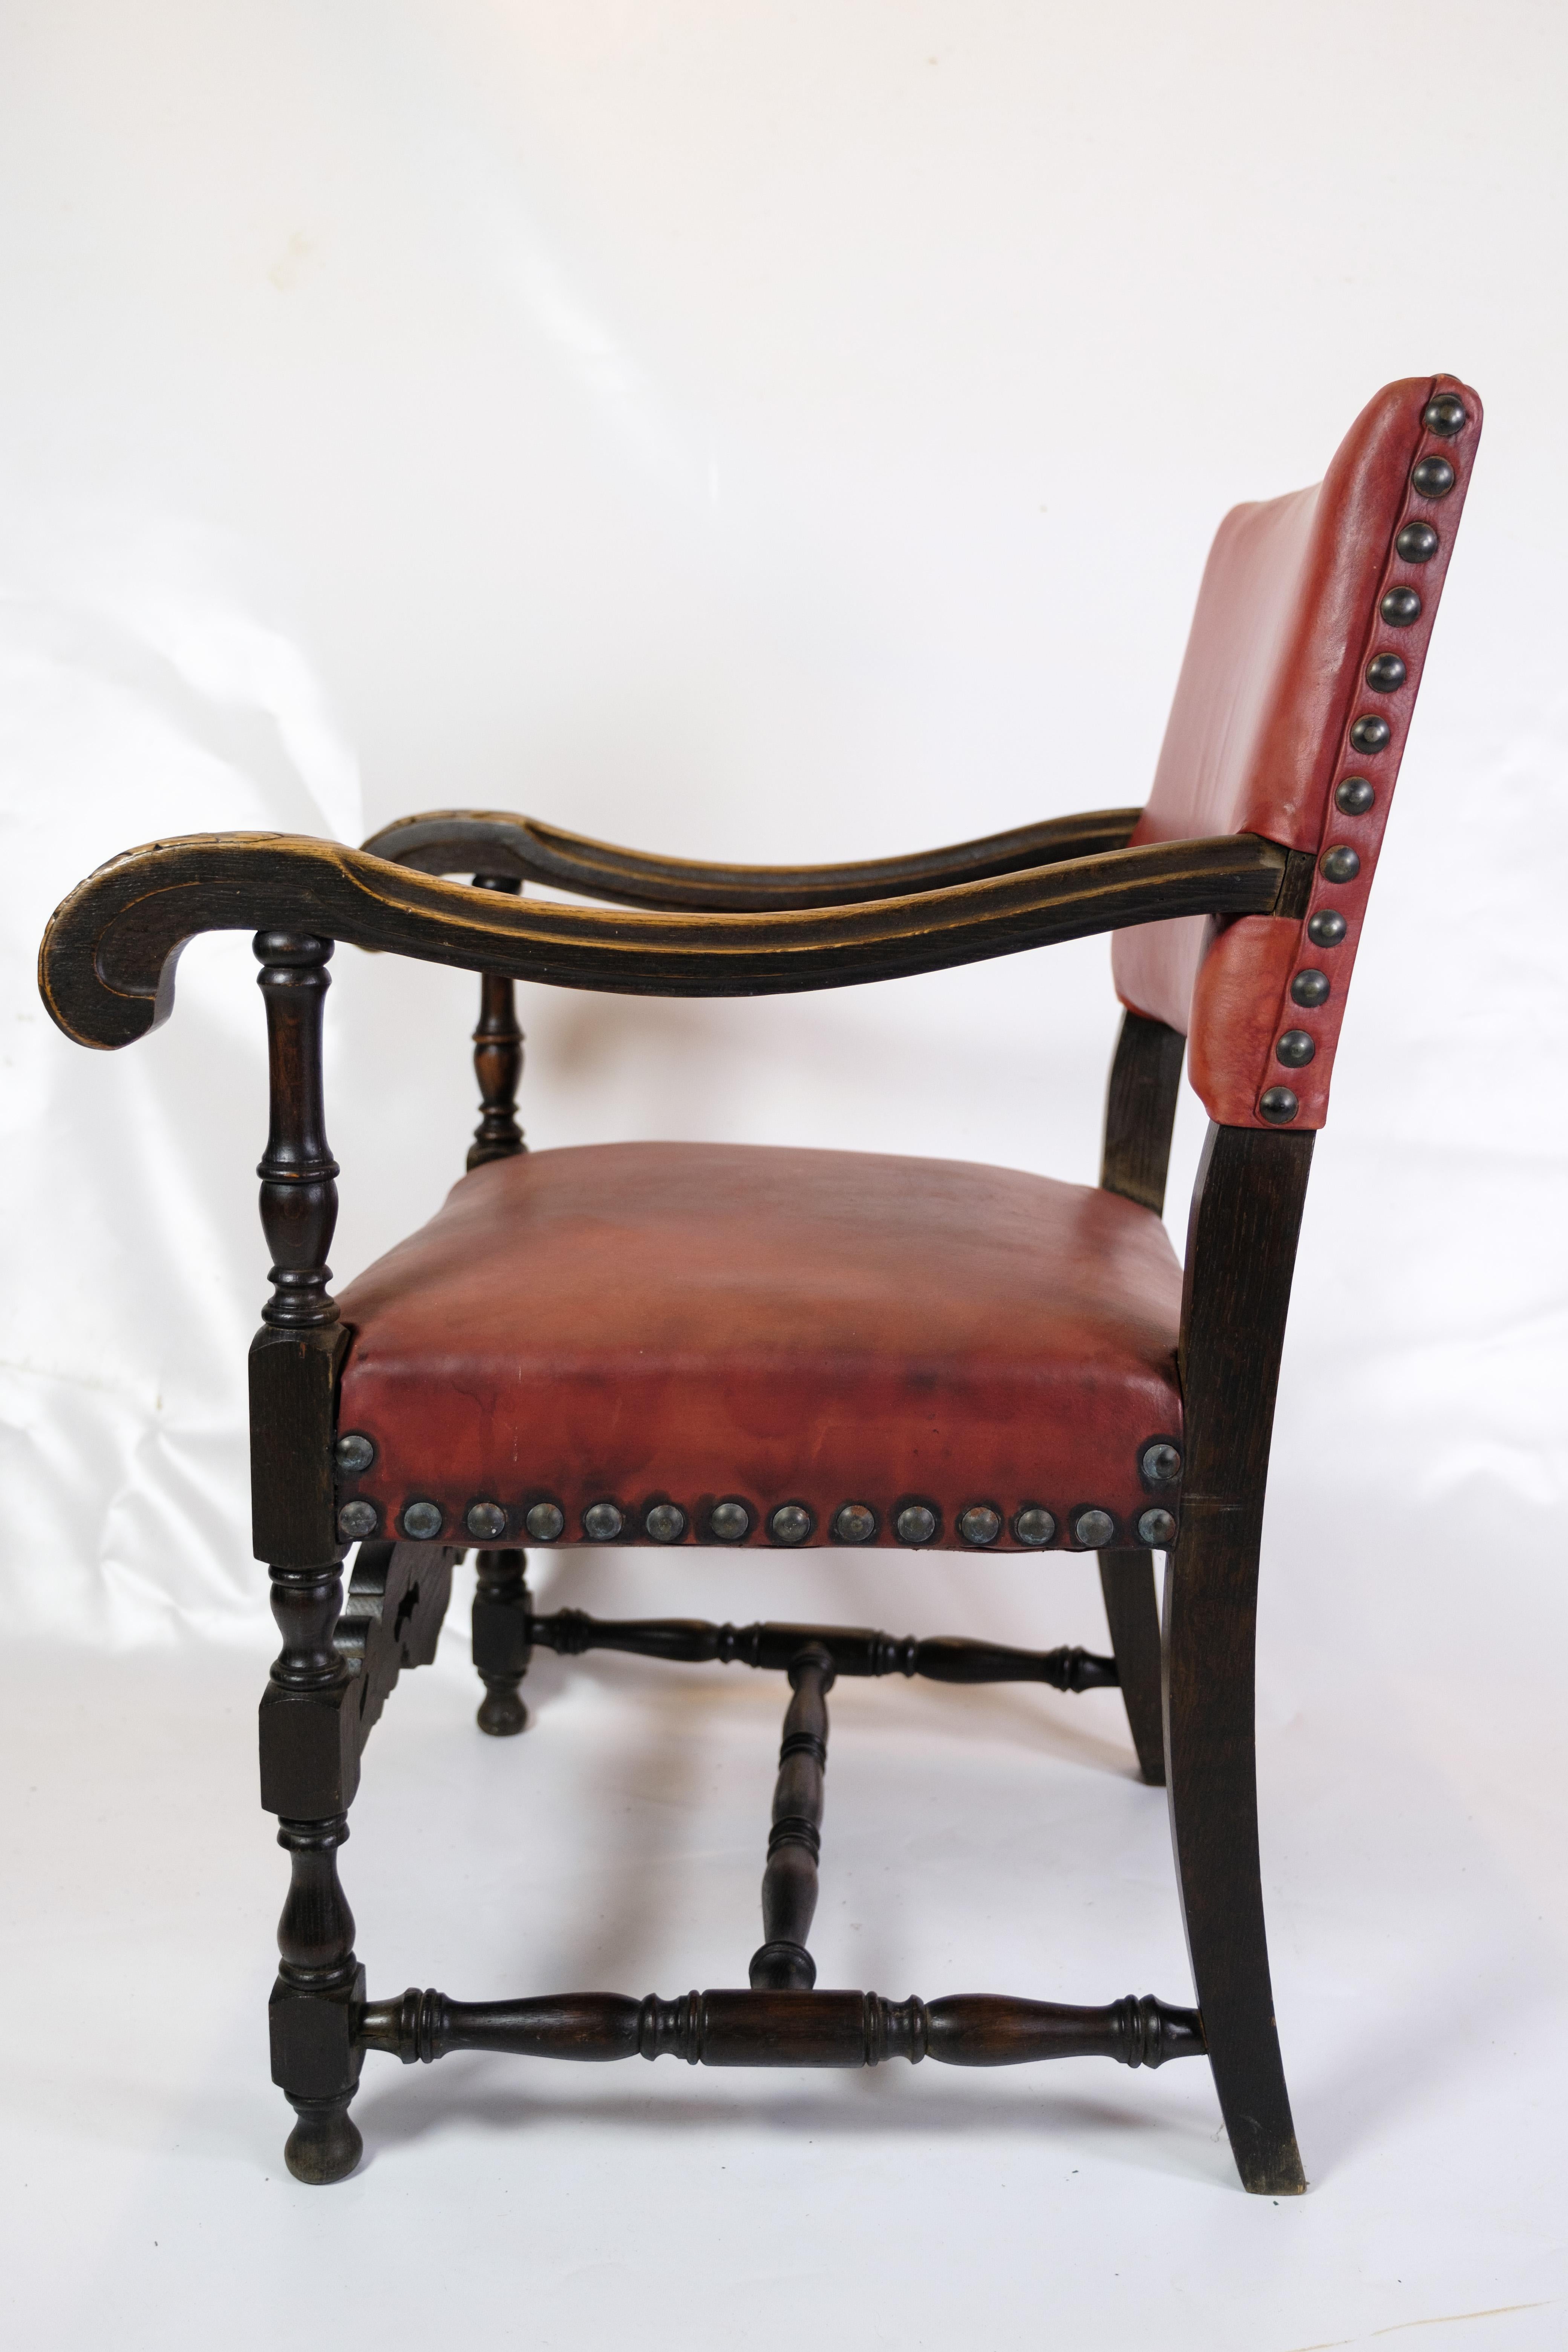 This set of two antique armchairs from 1930 is a wonderful combination of genuine craftsmanship and timeless elegance. With their red leather seats and oak frame, these chairs exude a unique vintage charm and warmth. The solid wooden construction